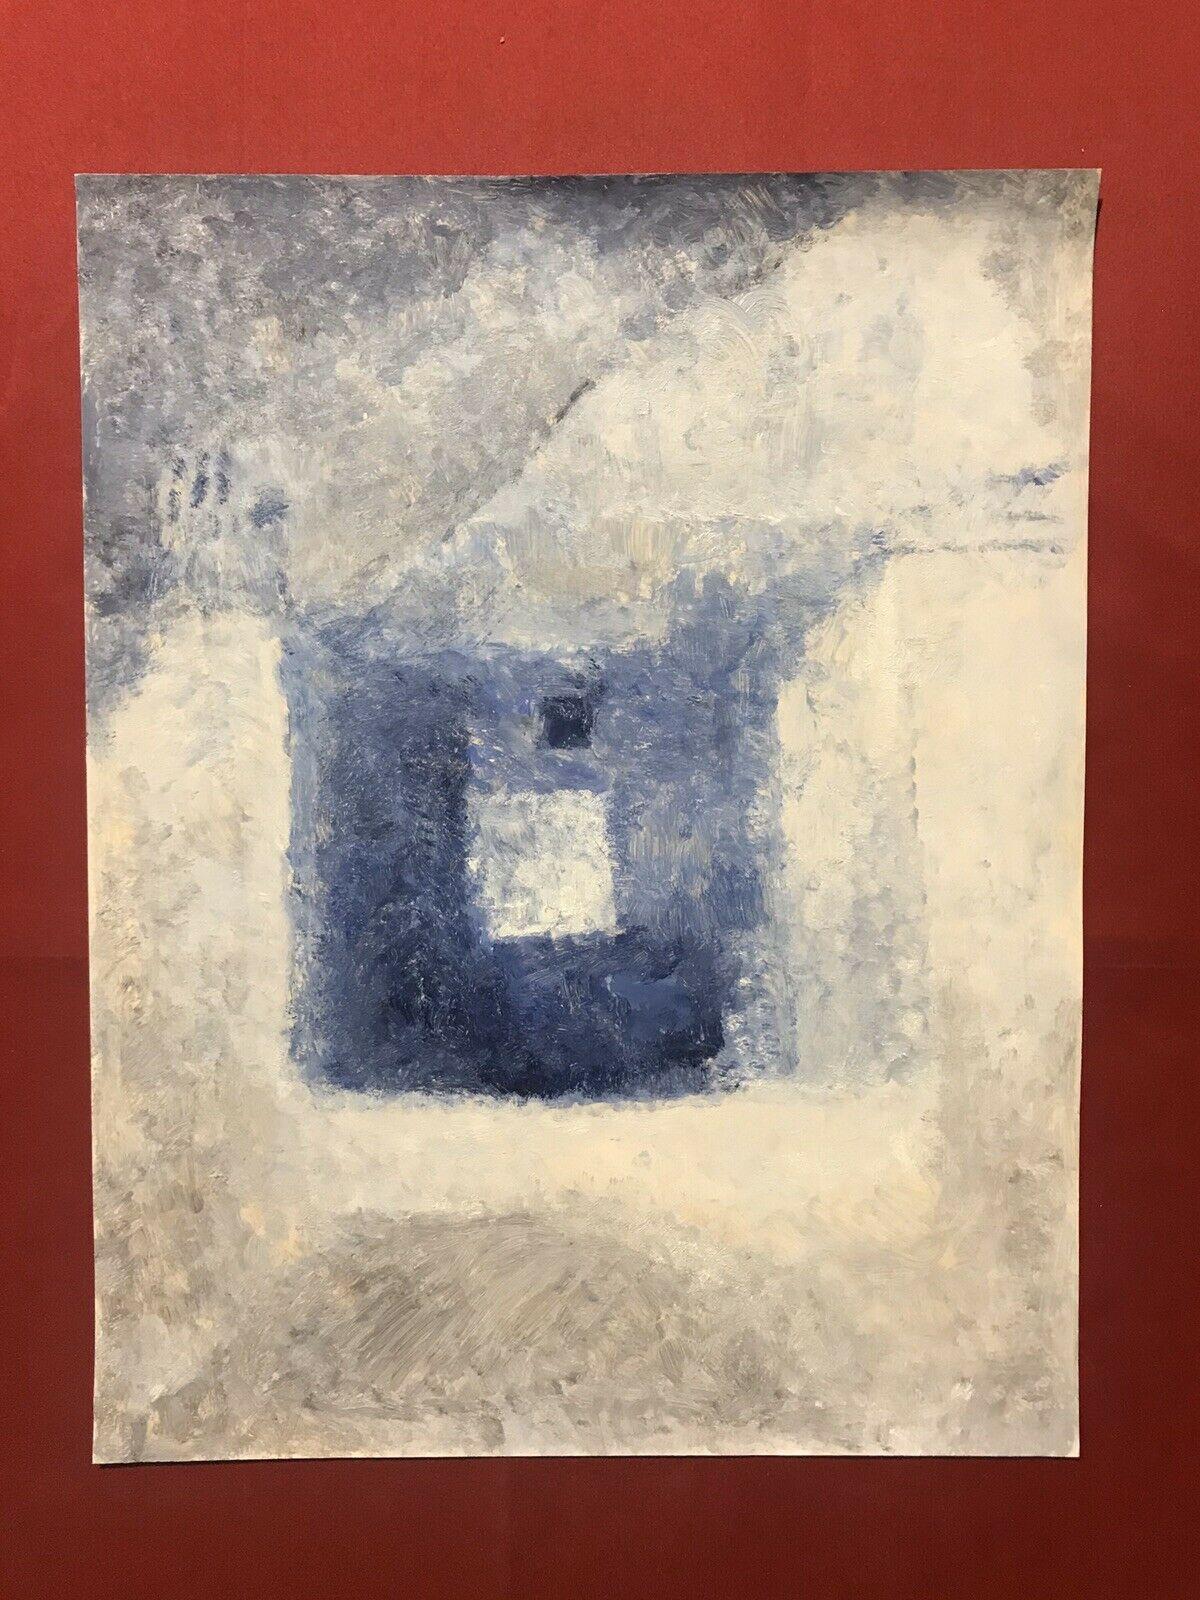 20TH CENTURY FRENCH CUBIST ABSTRACT PAINTING - BLUE GREY AND WHITE COLORS - Painting by Yvette Dubois Habasque